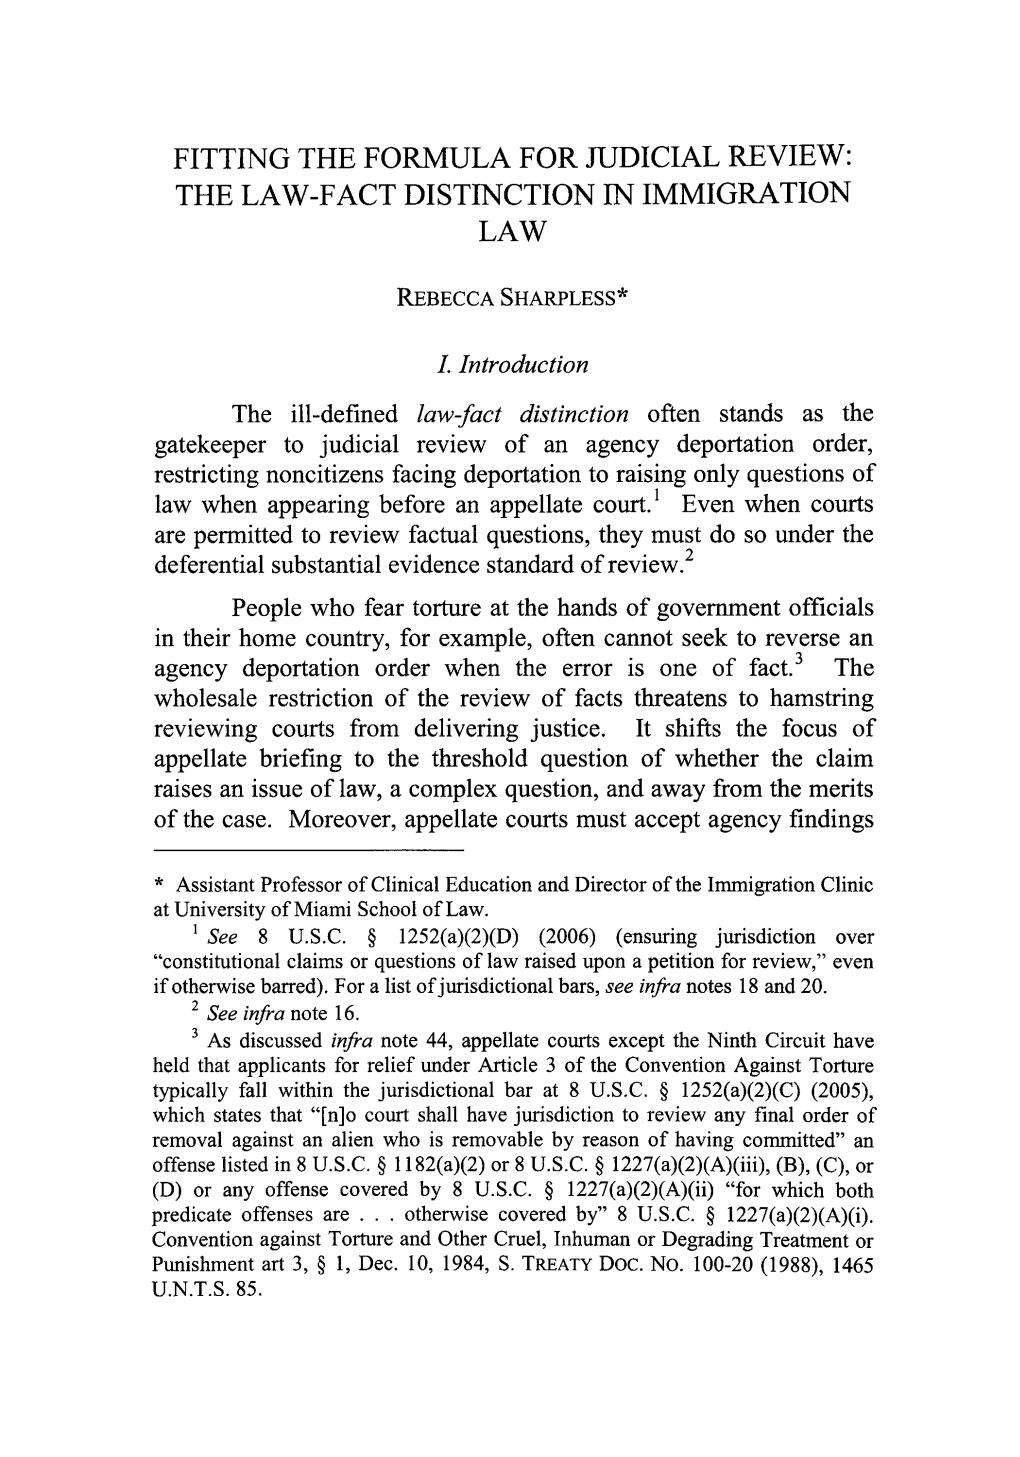 Fitting the Formula for Judicial Review: the Law-Fact Distinction in Immigration Law